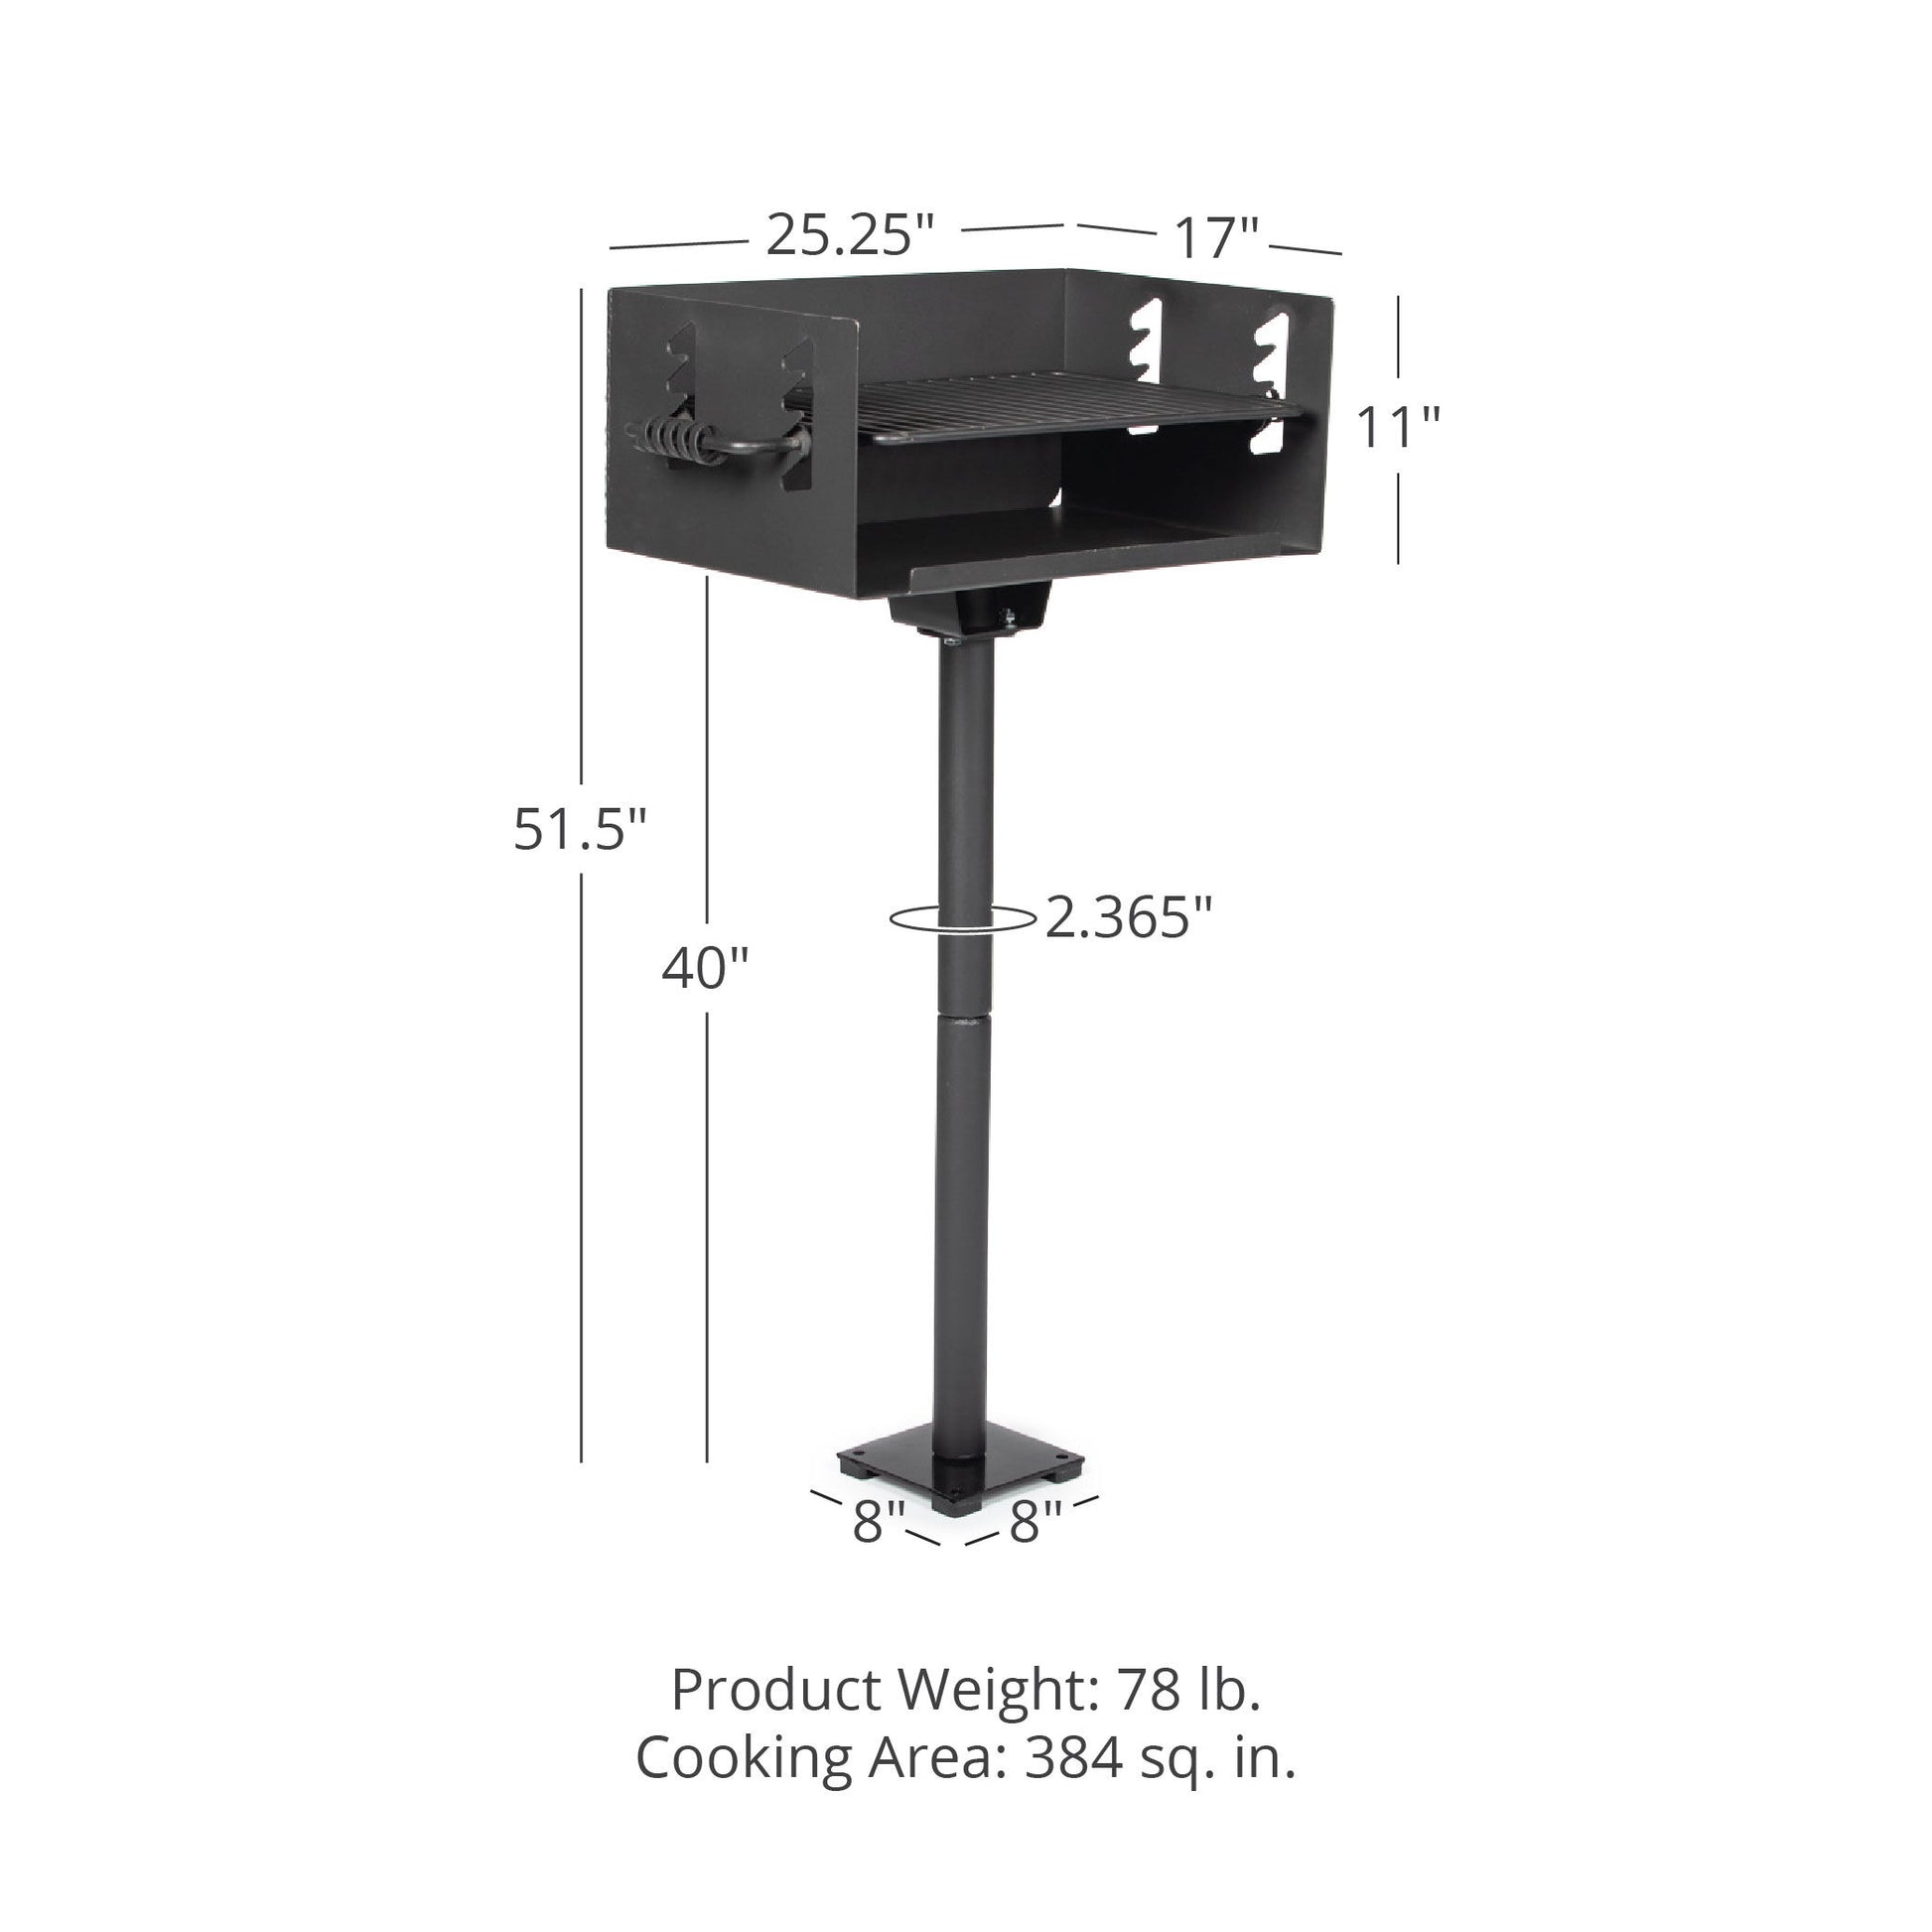 384 Sq. In. Jumbo Park-Style Grill - Optional Mounting Base: Grill + Base Anchor | Grill + Base Anchor